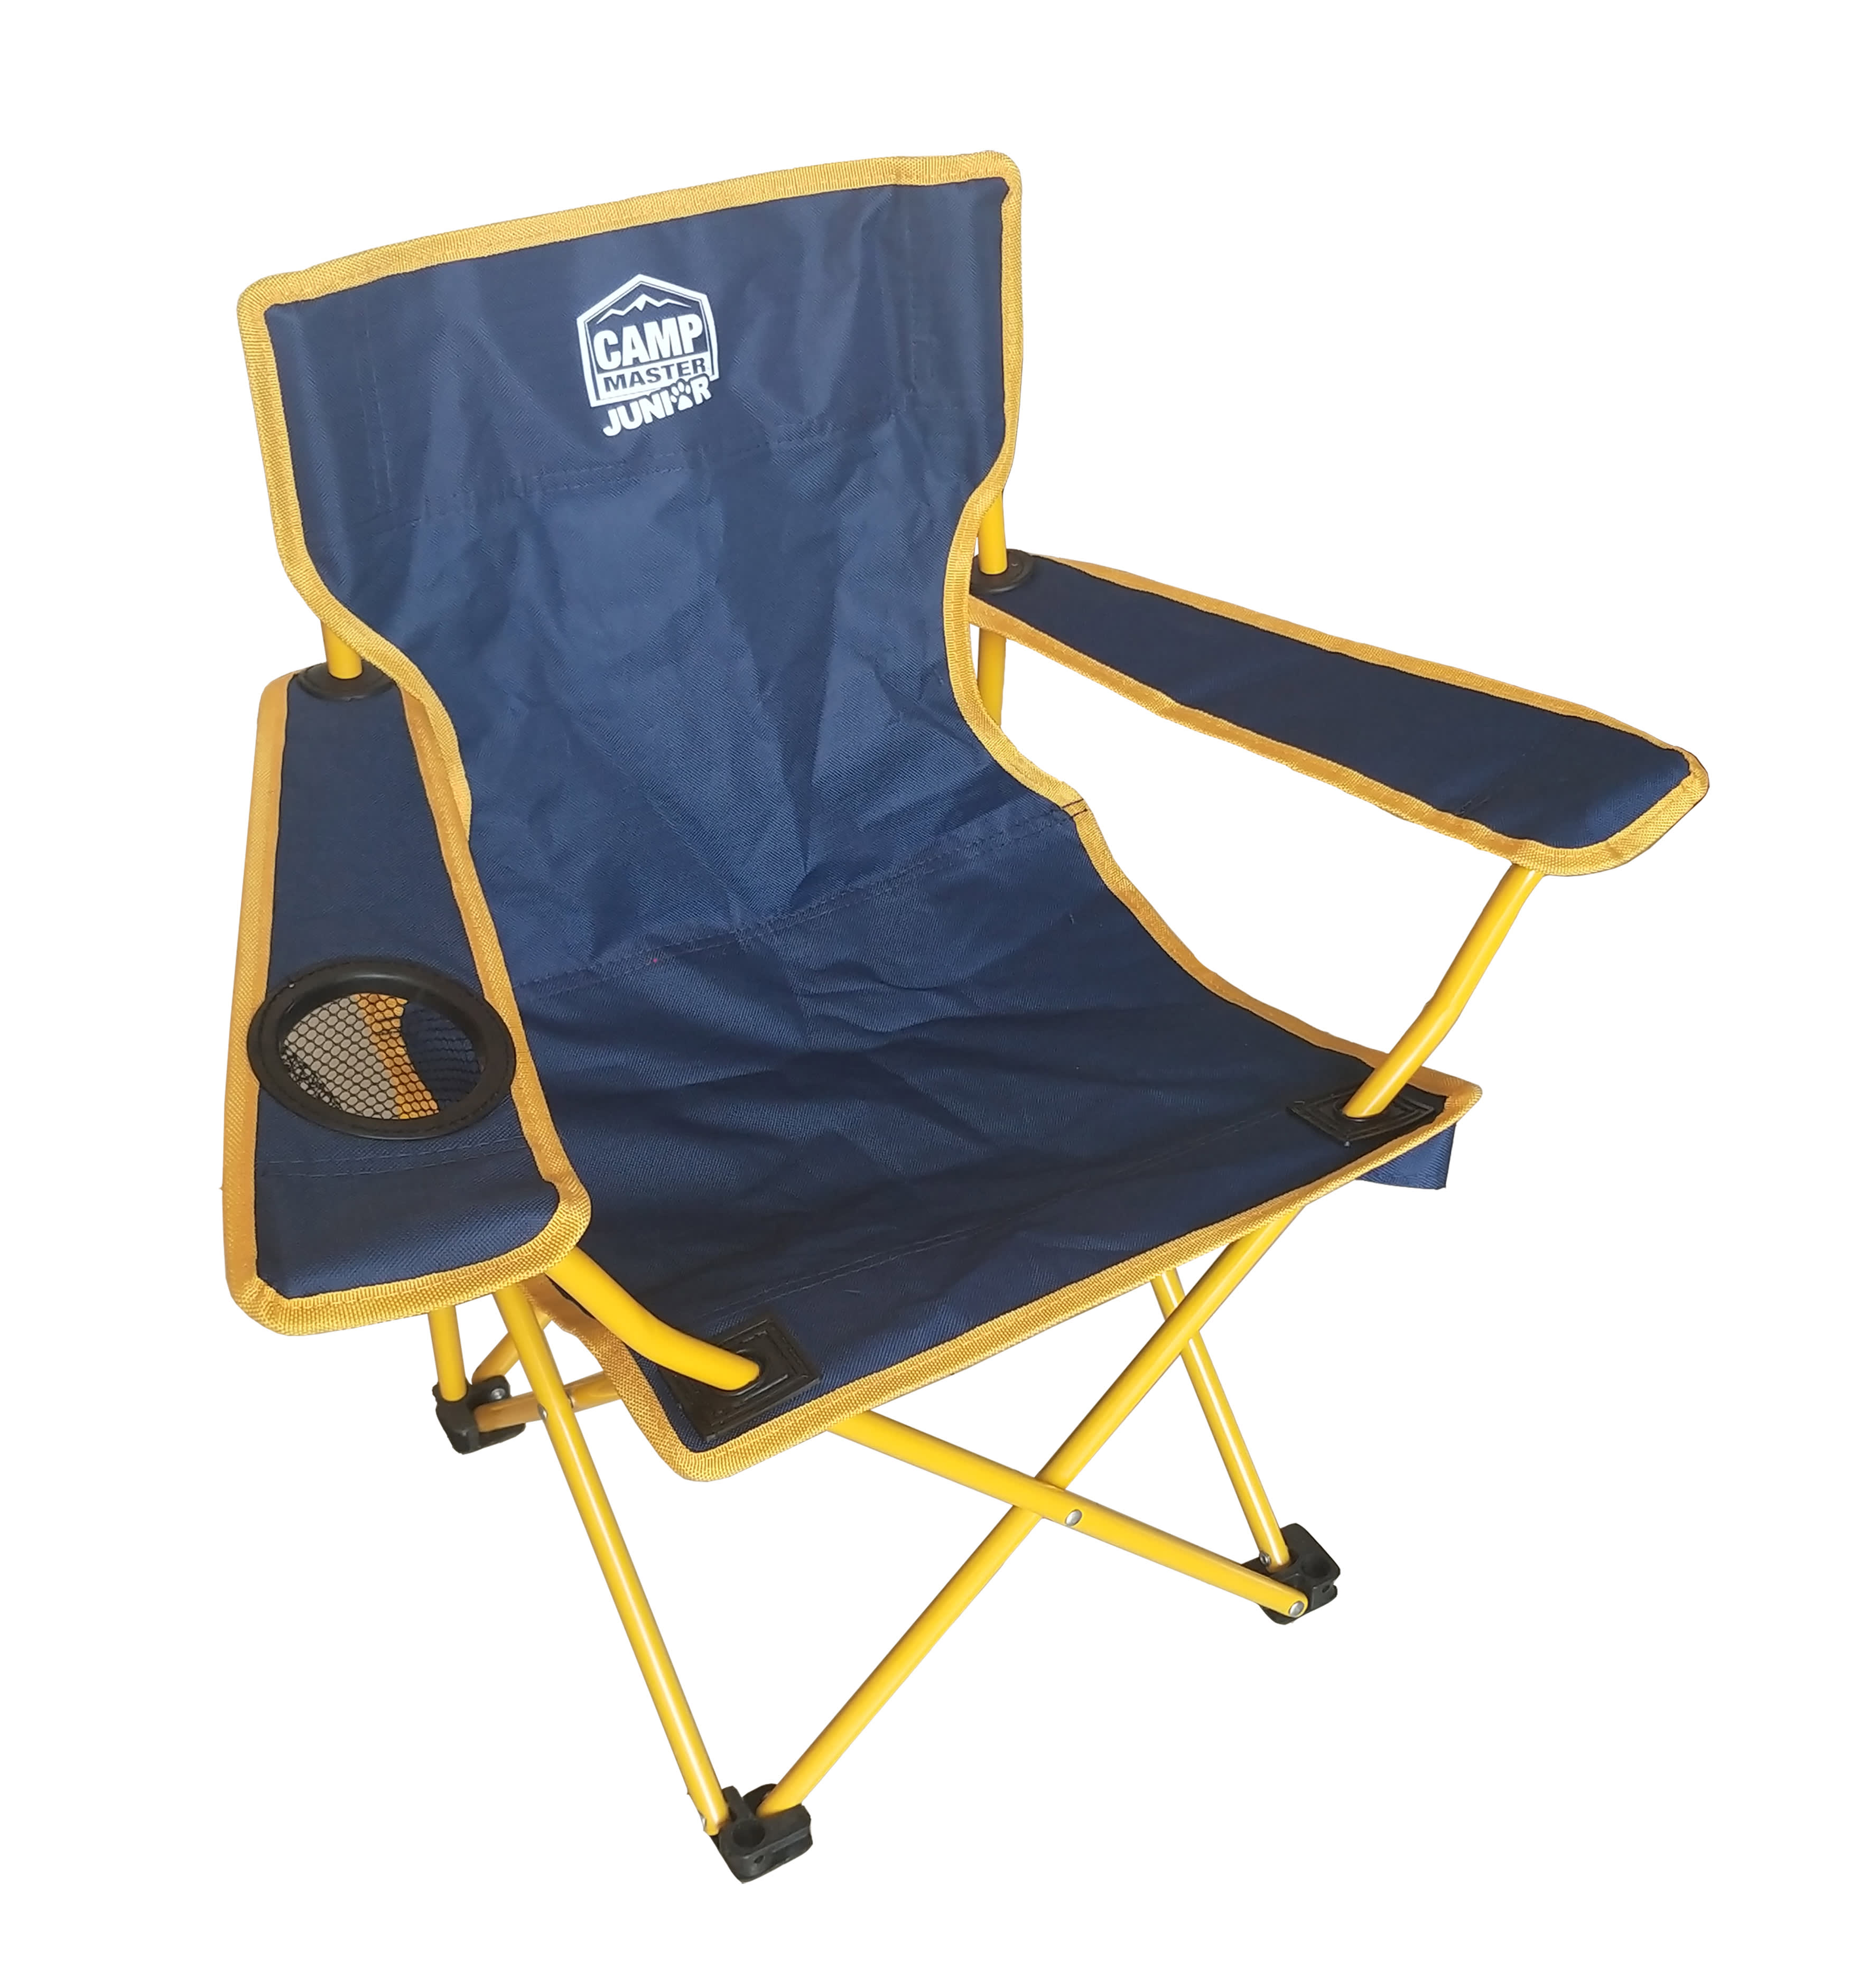 CAMP JUNIOR Kiddies Chair - Blue and orange for sale with Makro Outlet and bidorbuy